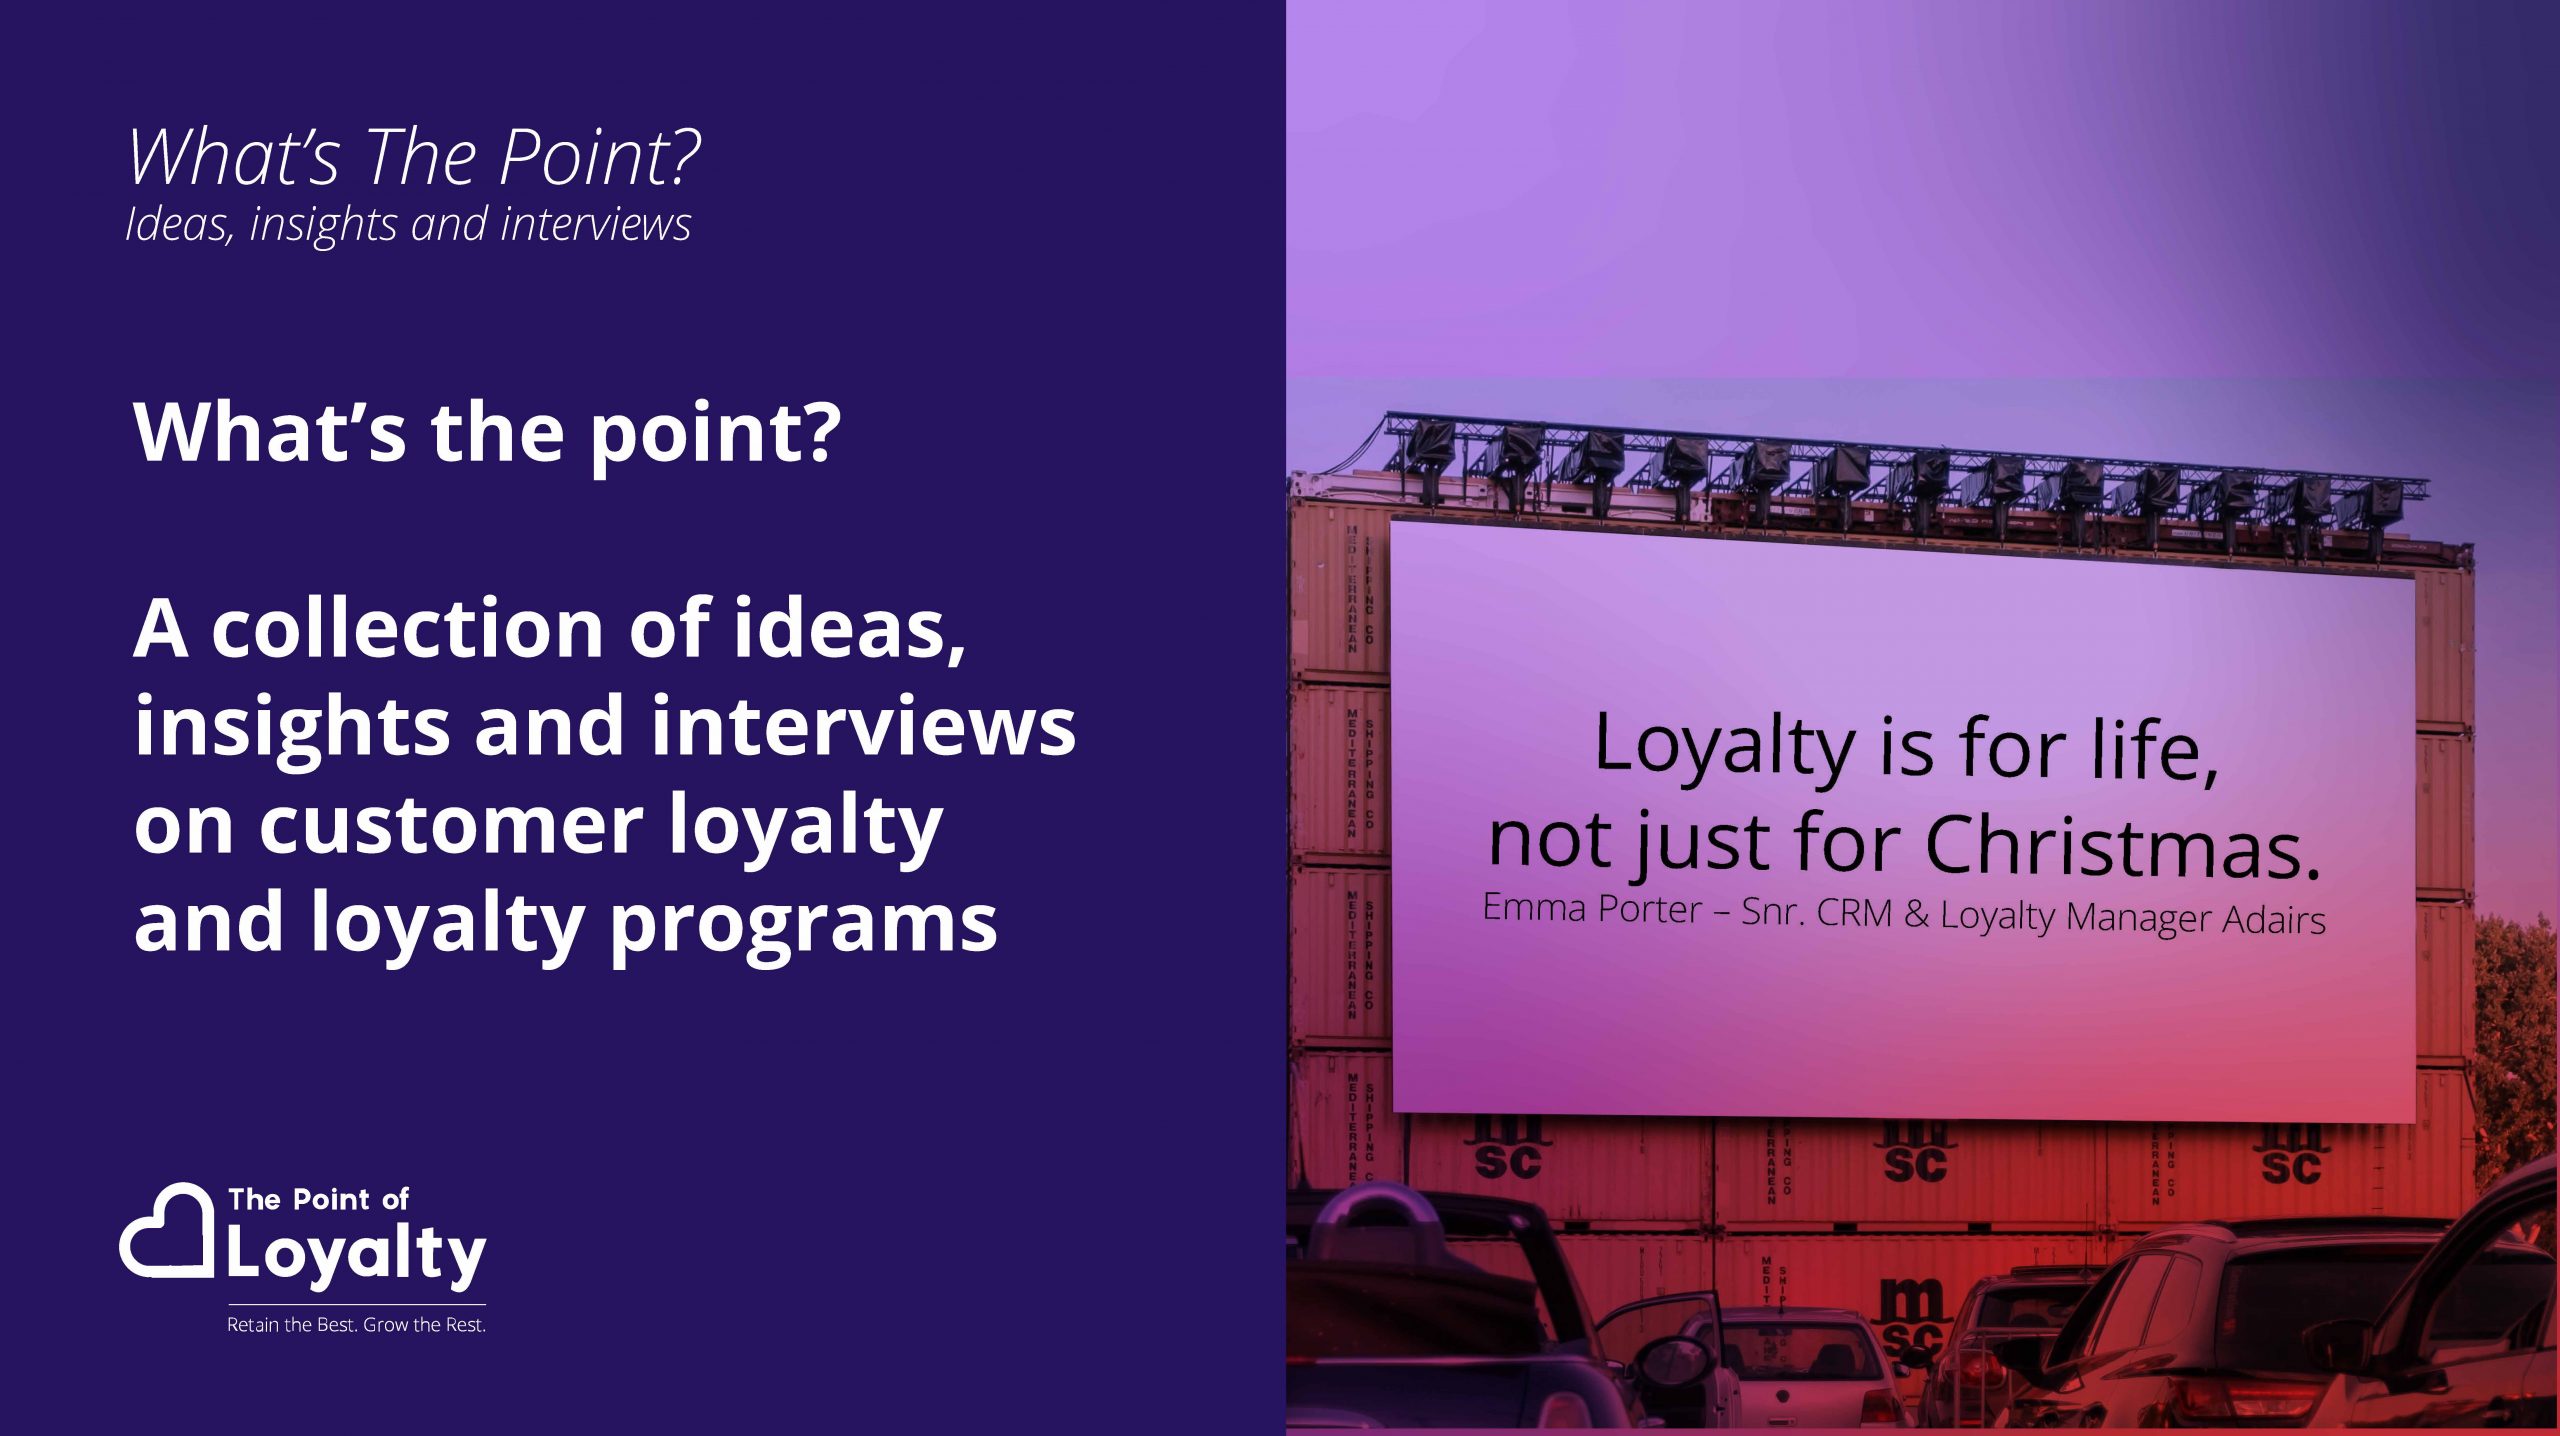 What’s the point? A collection of ideas, insights and interviews on customer loyalty and loyalty programs (#1)